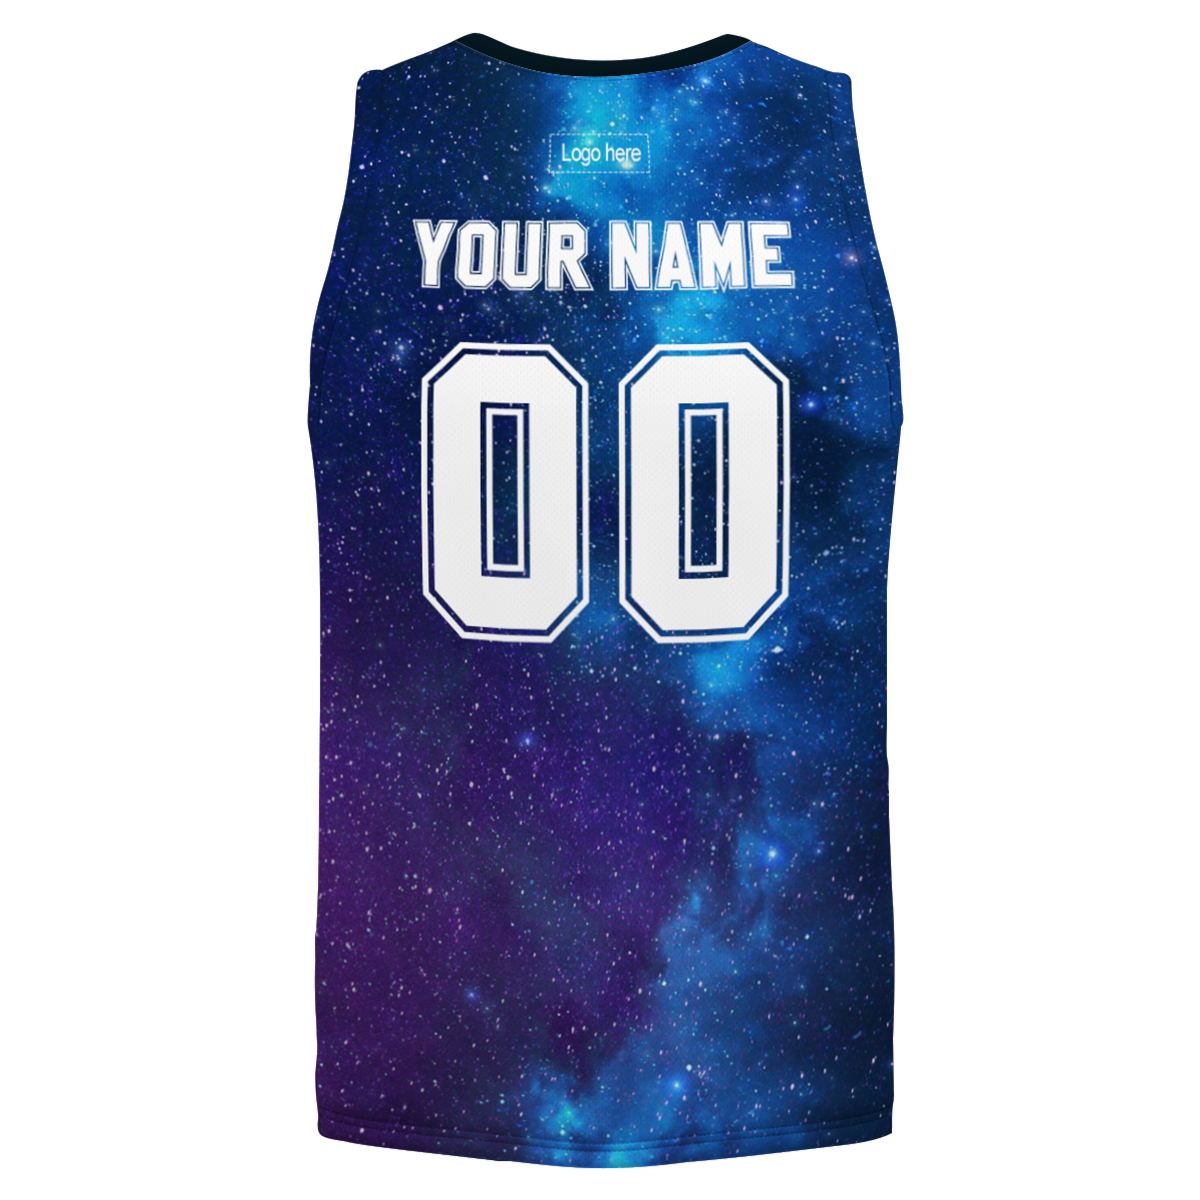 newest-sports-basketball-jersey-uniforms-design-sublimation-customize-print-on-demand-basketball-suits-at-cj-pod-6